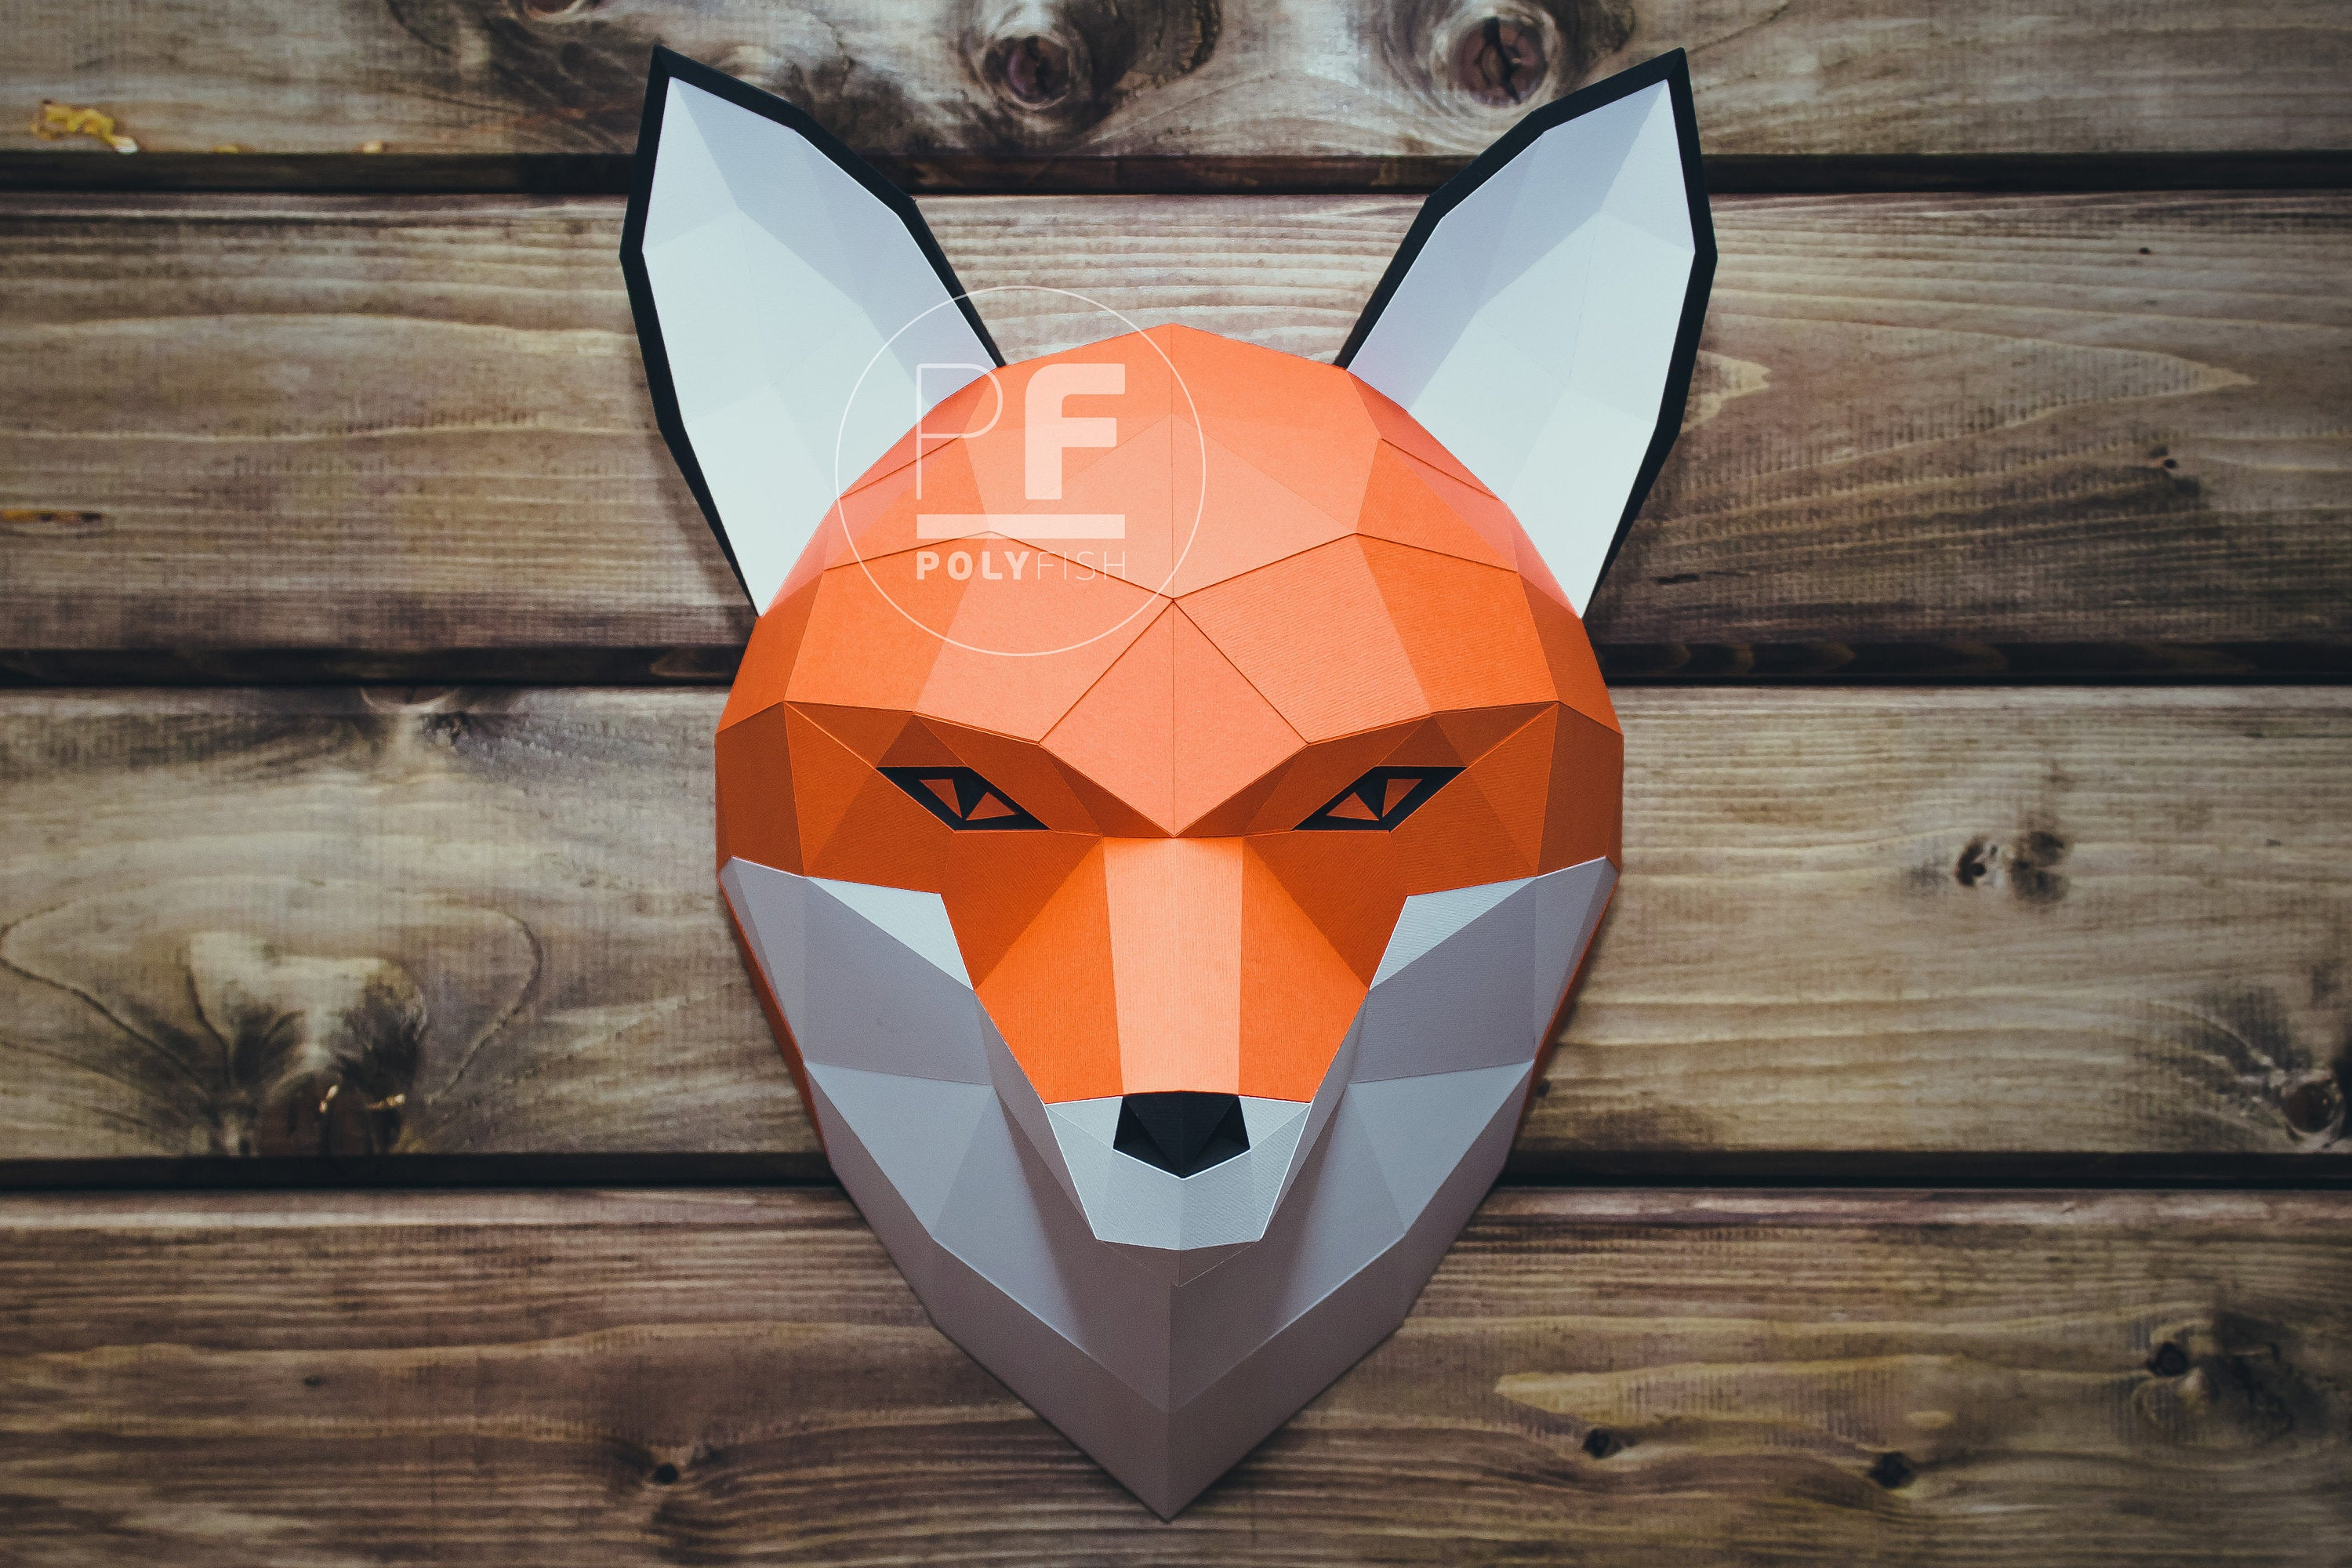 Fox Puppet Origami Fox Head Lowpoly Wall Decor Paper Model Diy Template Origami 3d Pdf Template Papercraft Animals Low Poly Diy Paper Trophie On Wall